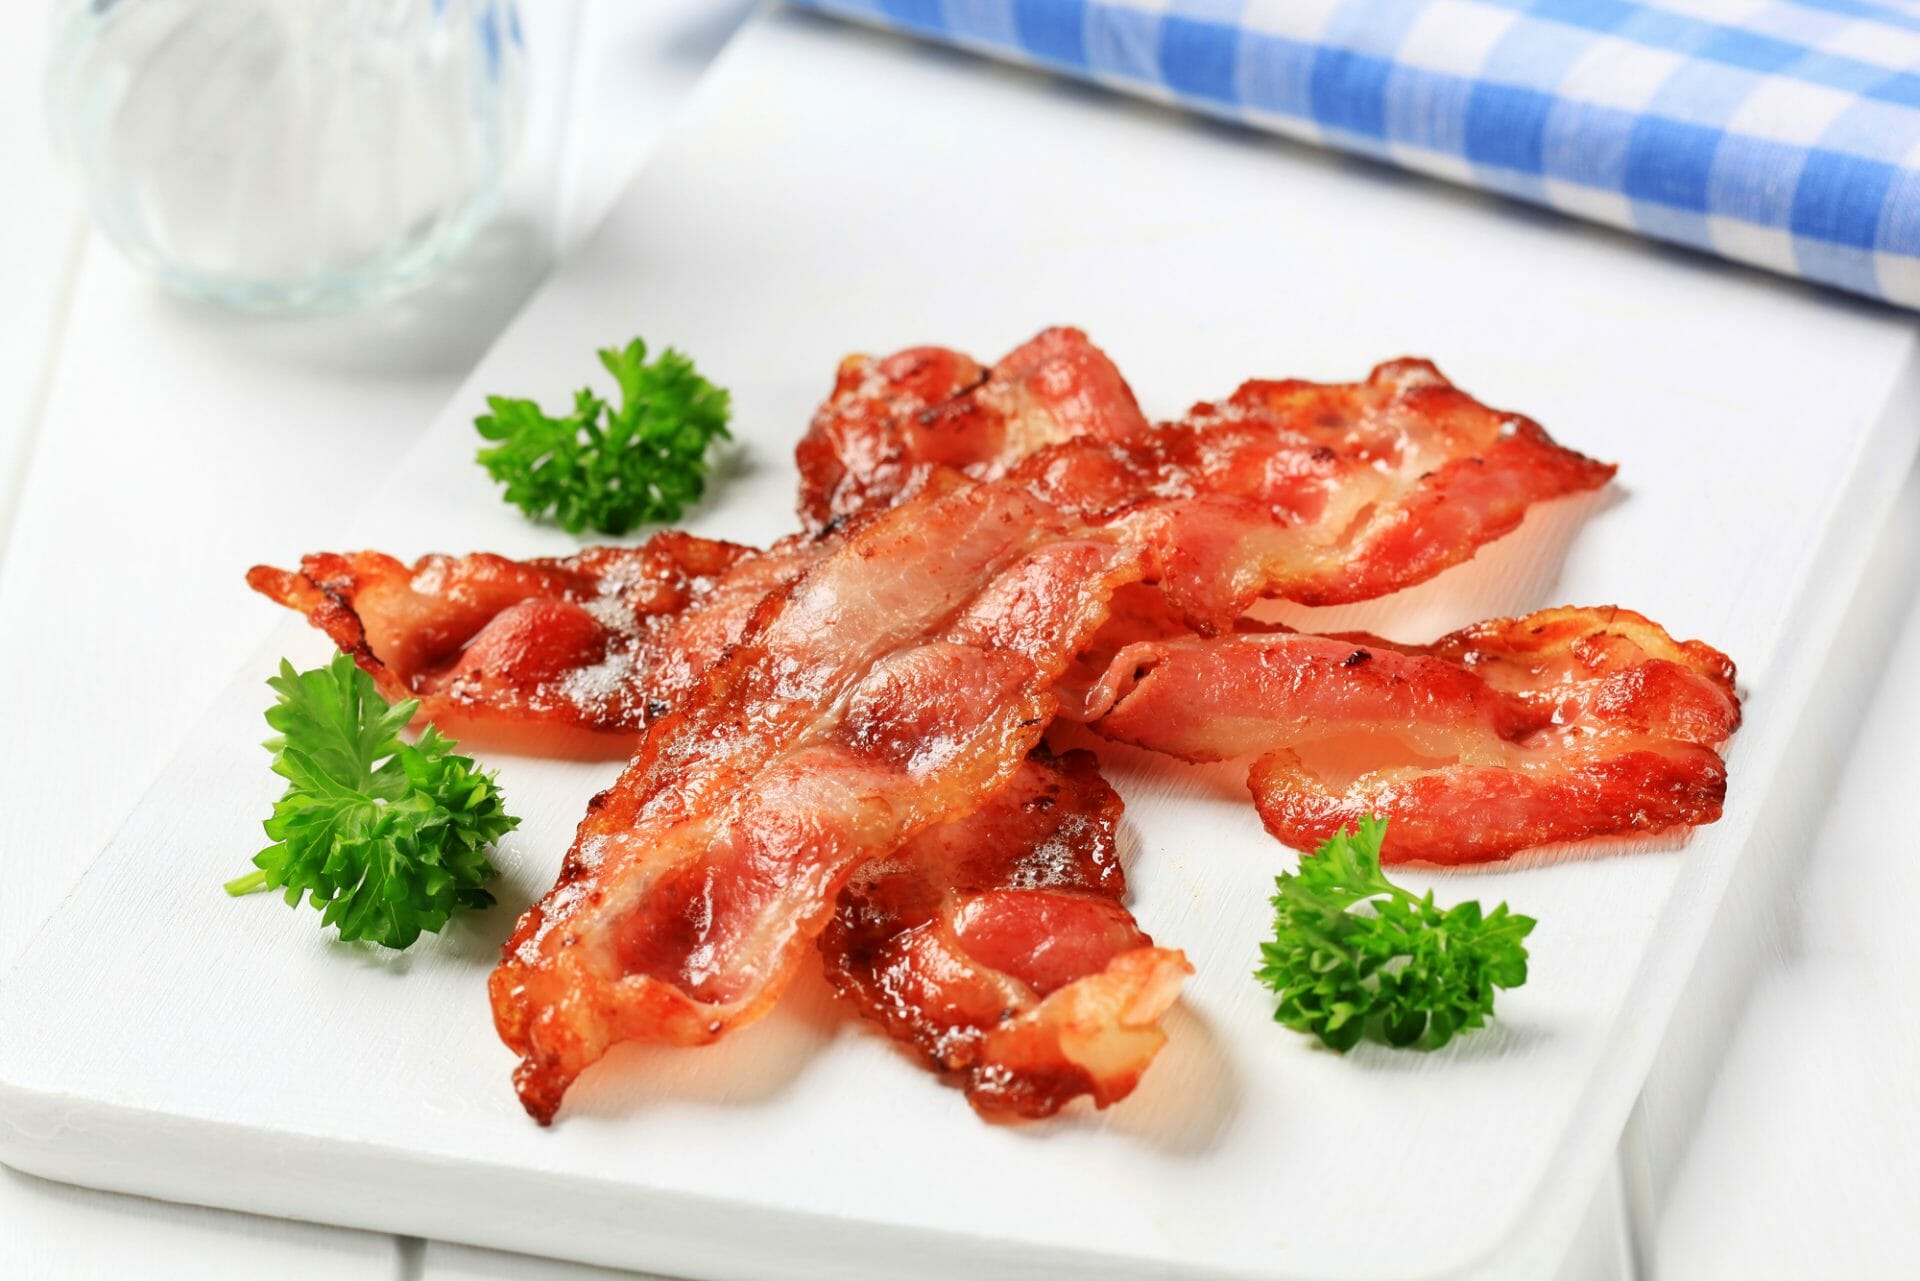 How Long Can Cooked Bacon Sit Out?